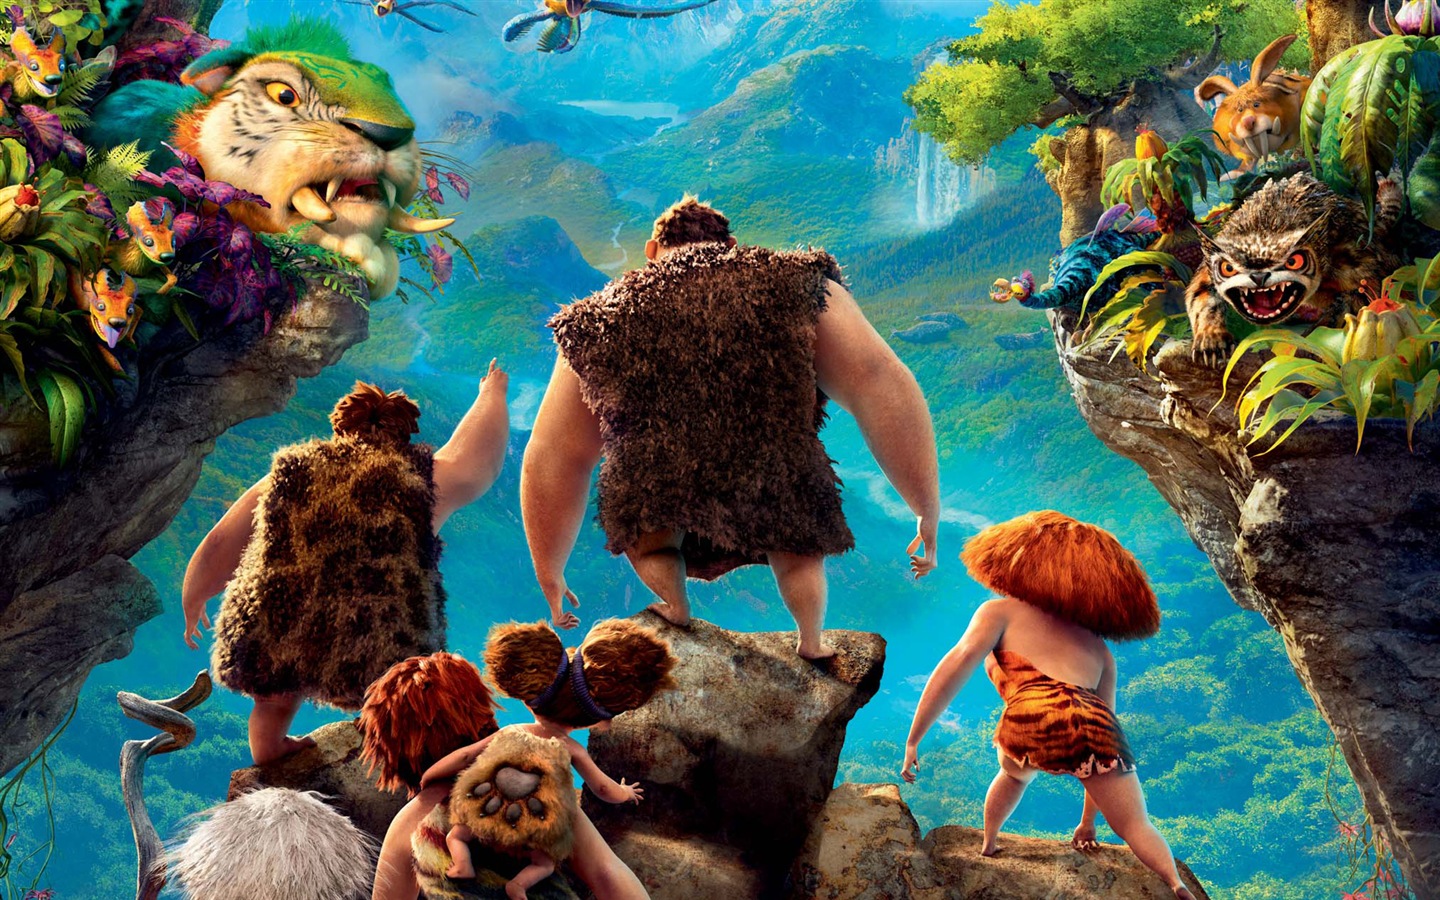 V Croods HD Movie Wallpapers #5 - 1440x900